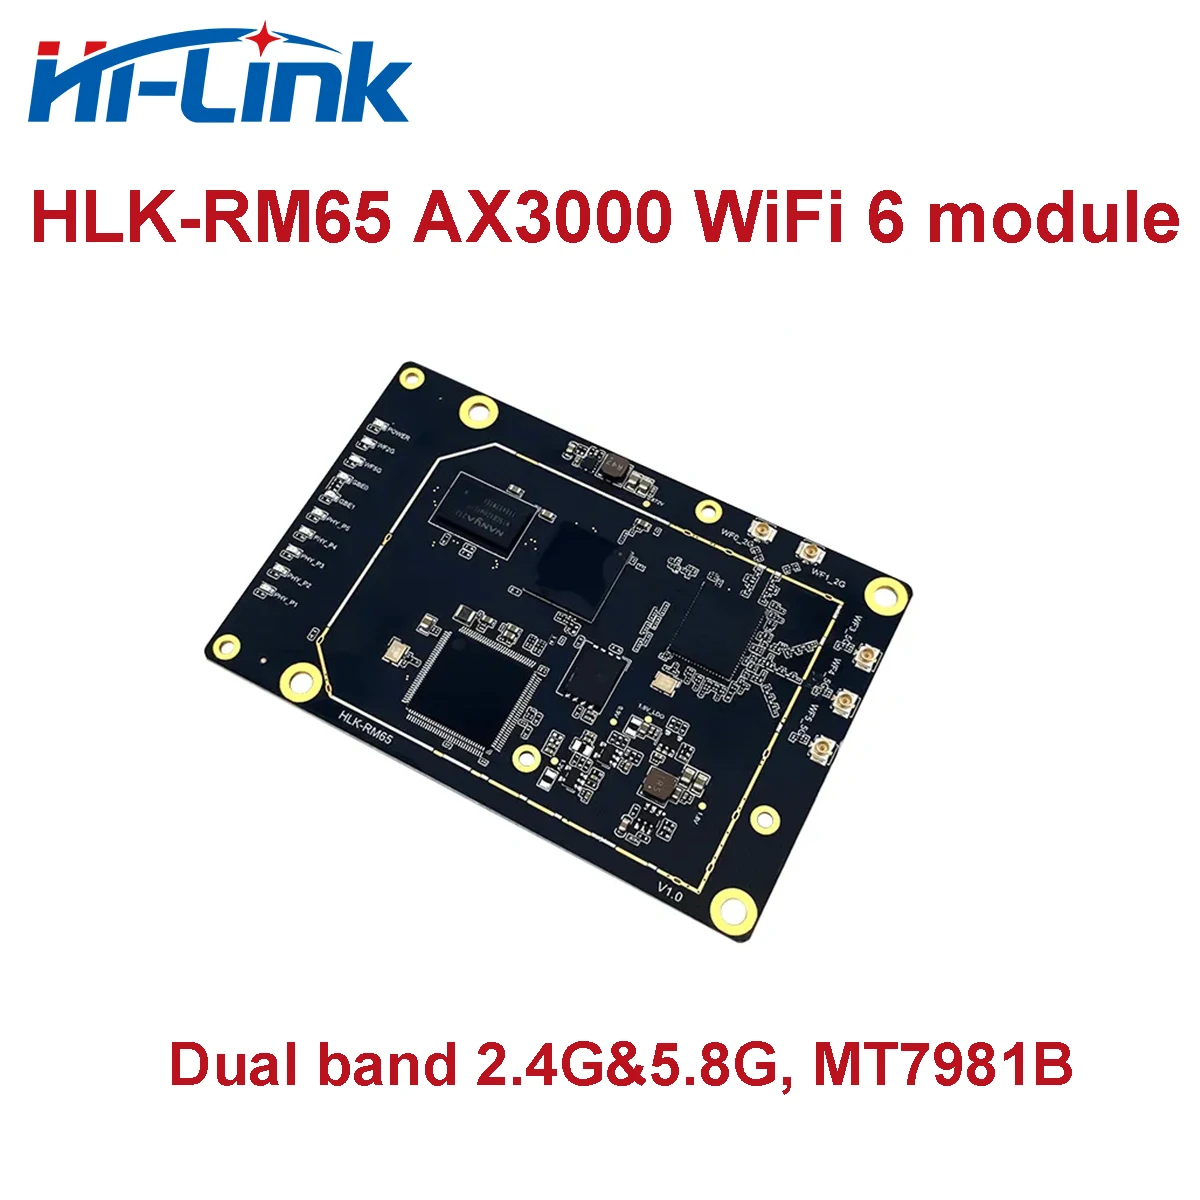 HLK-RM65 Openwrt WiFi 6 Gigabit MT7981B+MT7976C+MT7531A Router Module Kit with 256M RAM and 128M Flash